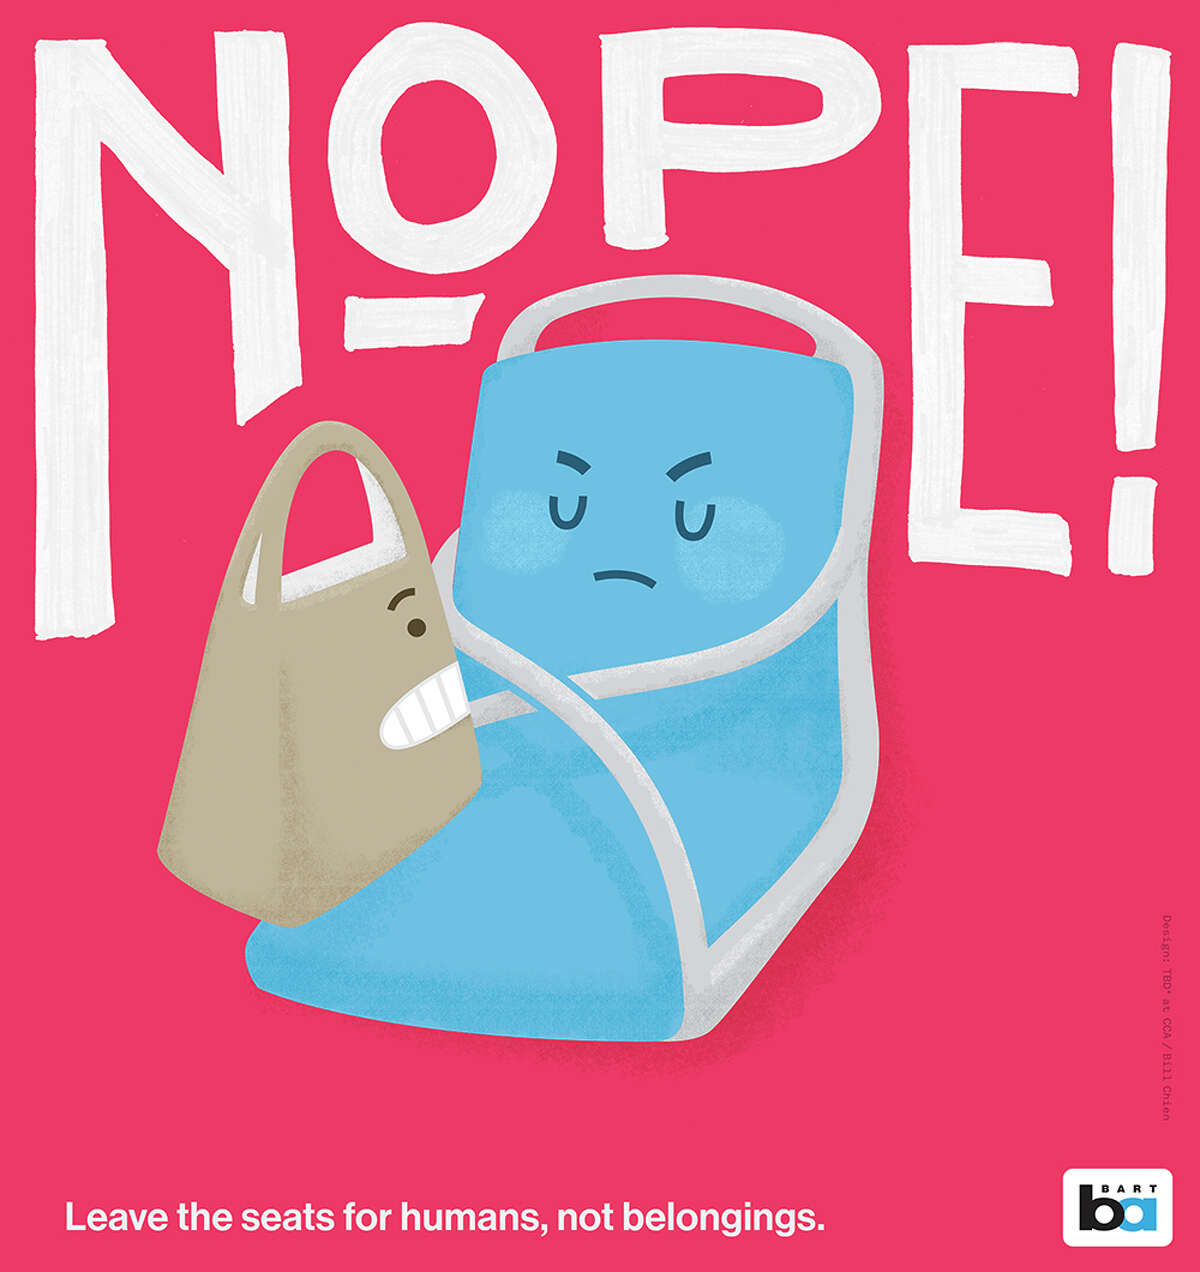 BART's new etiquette posters were designed by students of California College of the Arts.